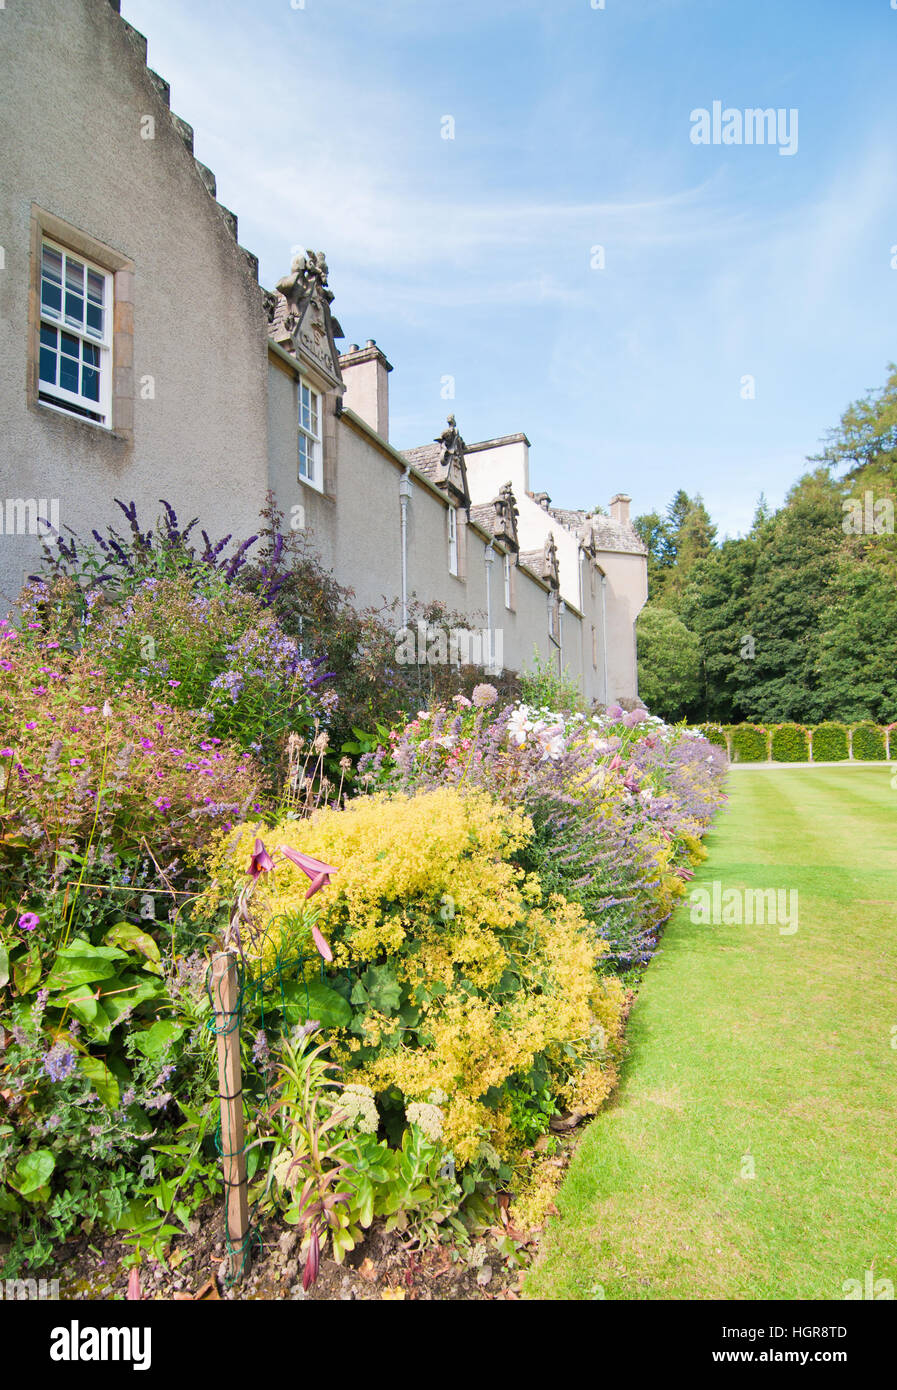 Perennial flower bed well stocked at a Scottish castle Stock Photo